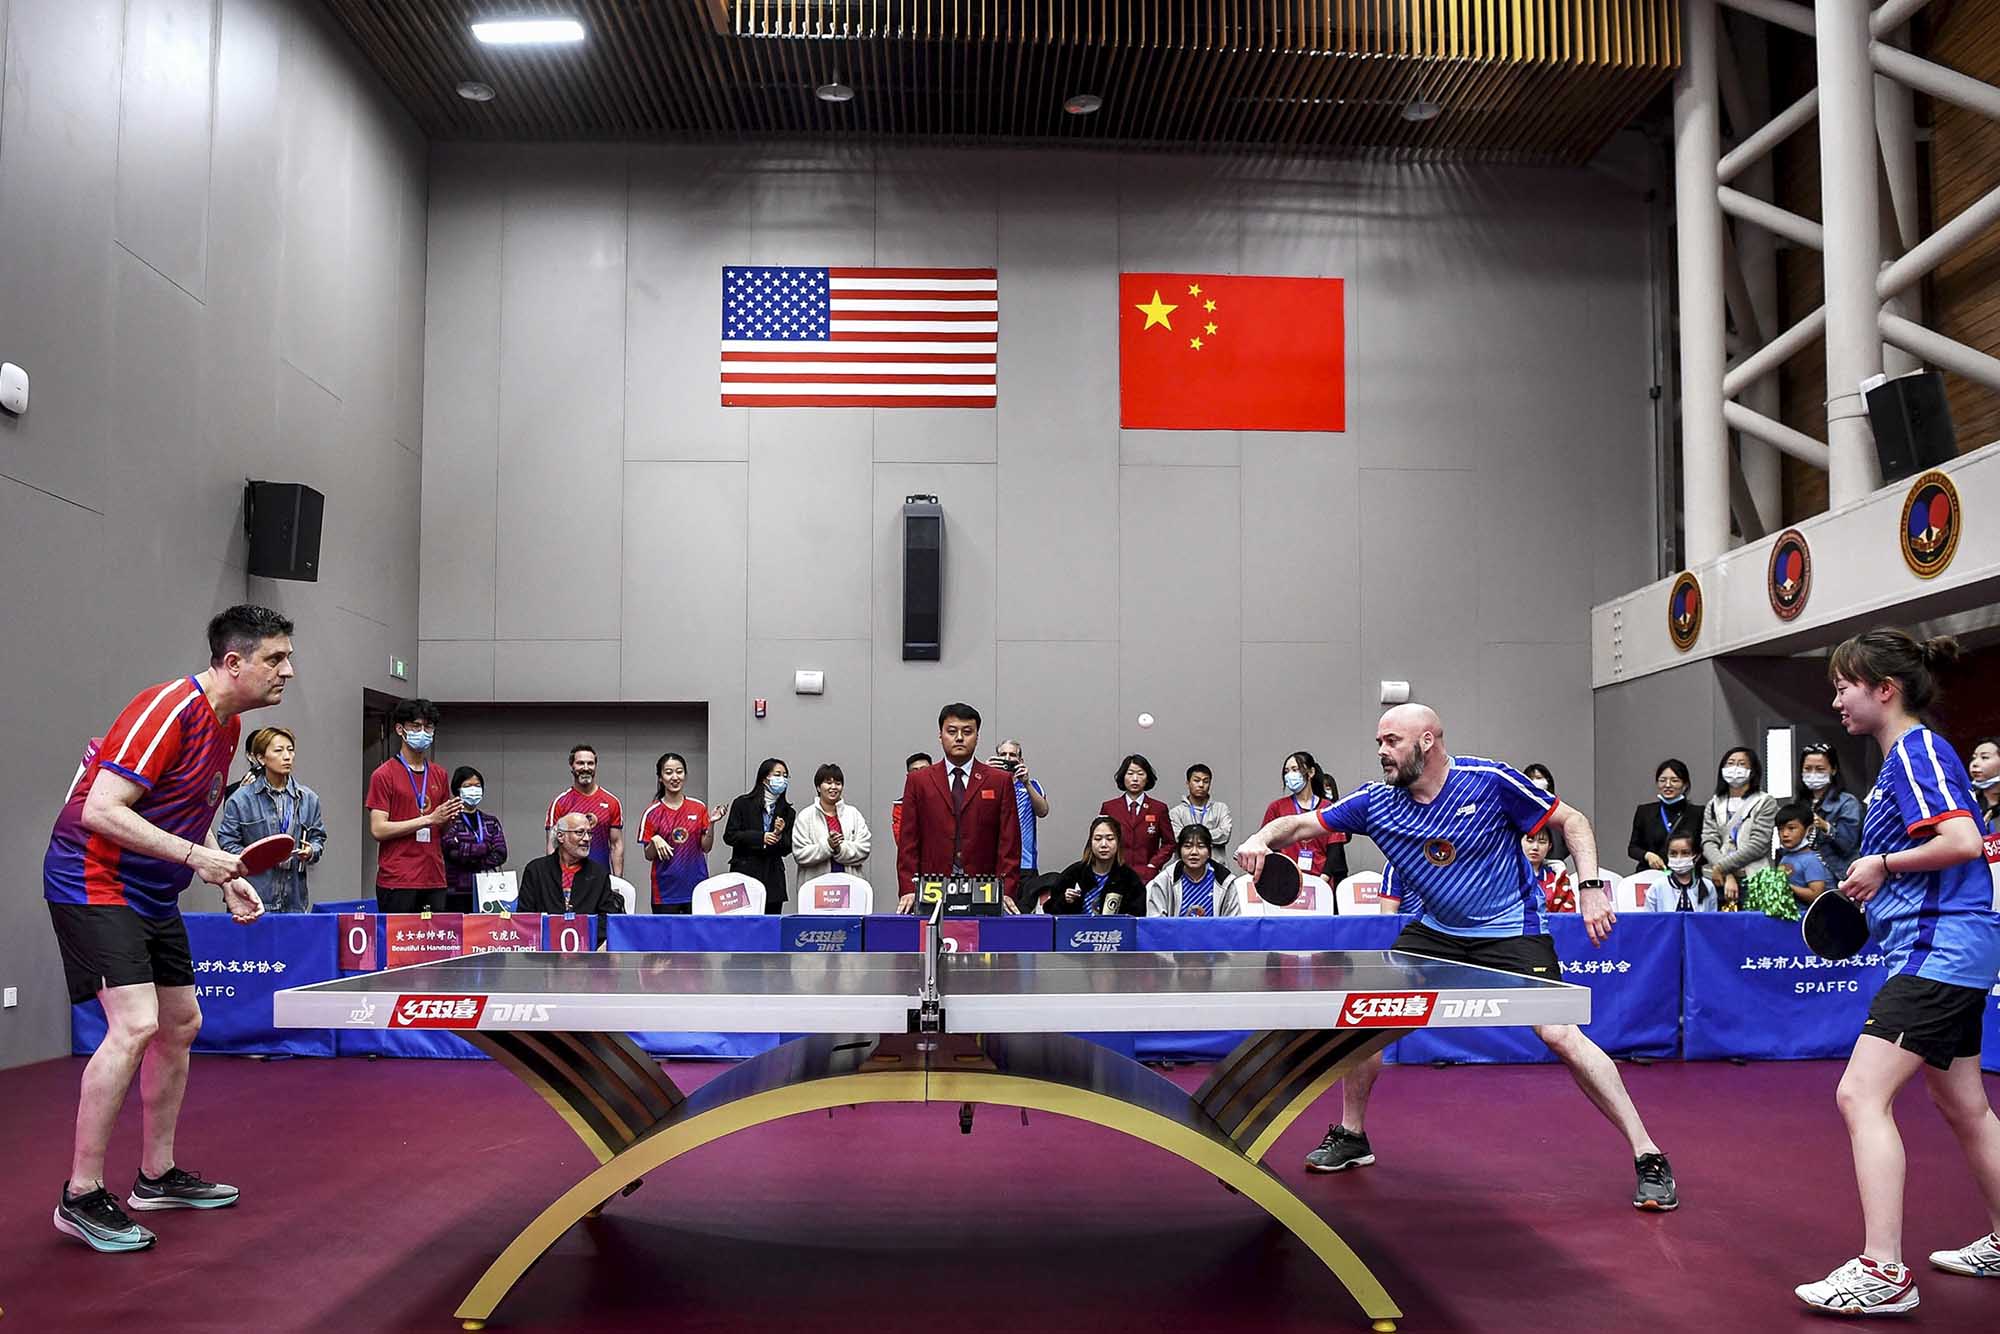 Justin O’Jack, left, receives a serve from Corey Skelton at the International Table Tennis Federation Museum